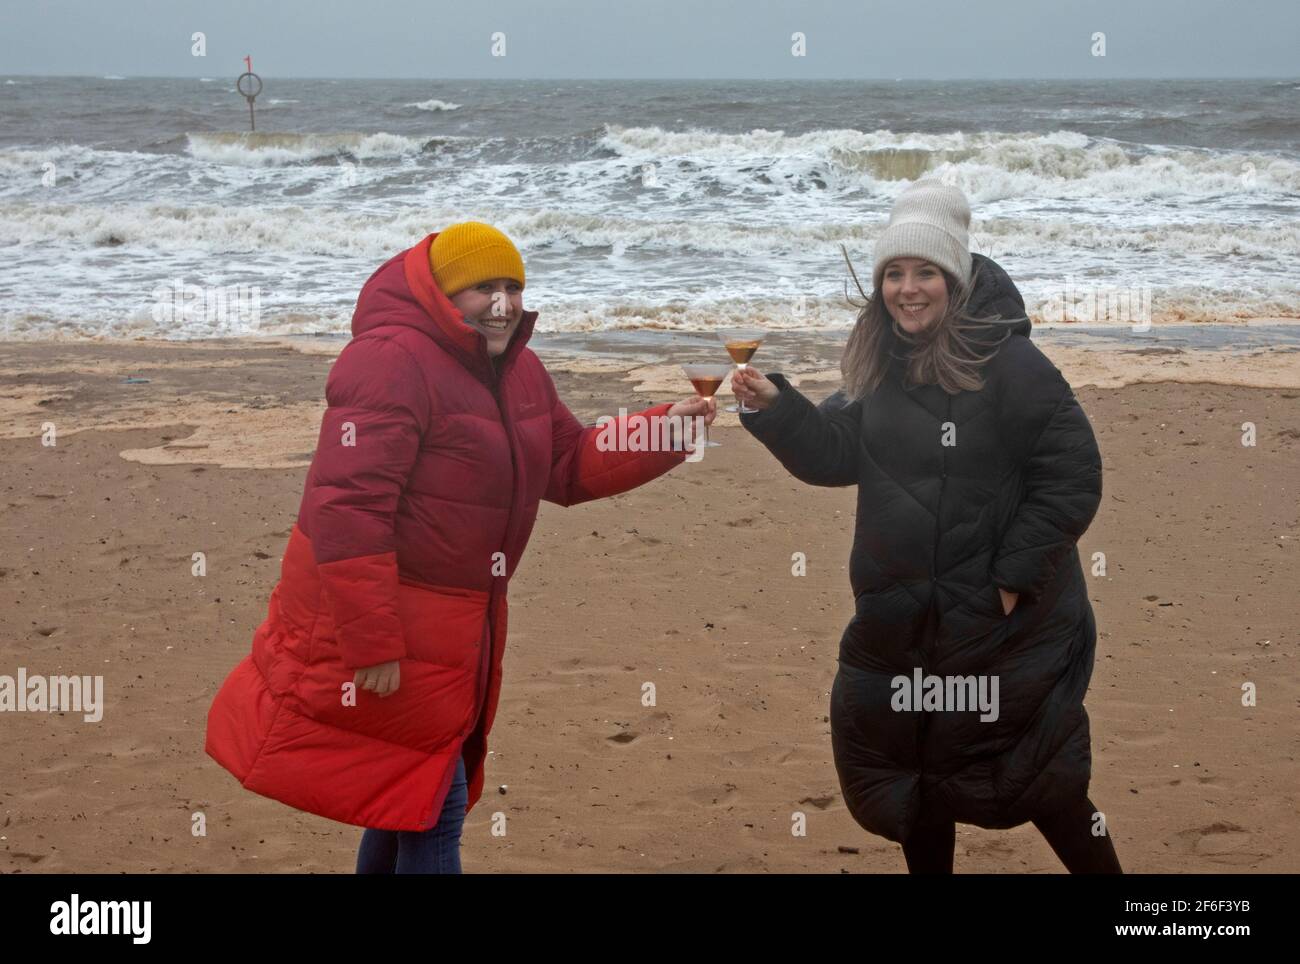 Portobello, Edinburgh, Scotland, UK weather. 31st March 2021. Stormy afternoon with temperature 6 degrees centigrade and rough seas on the Firth of Forth for Robyn (red Coat) who is celebrating her 39th Birthday today on the beach with her best friend Emma. They would normally be in a restaurant but not currently possible due to Covid -19 restrictions. Stock Photo